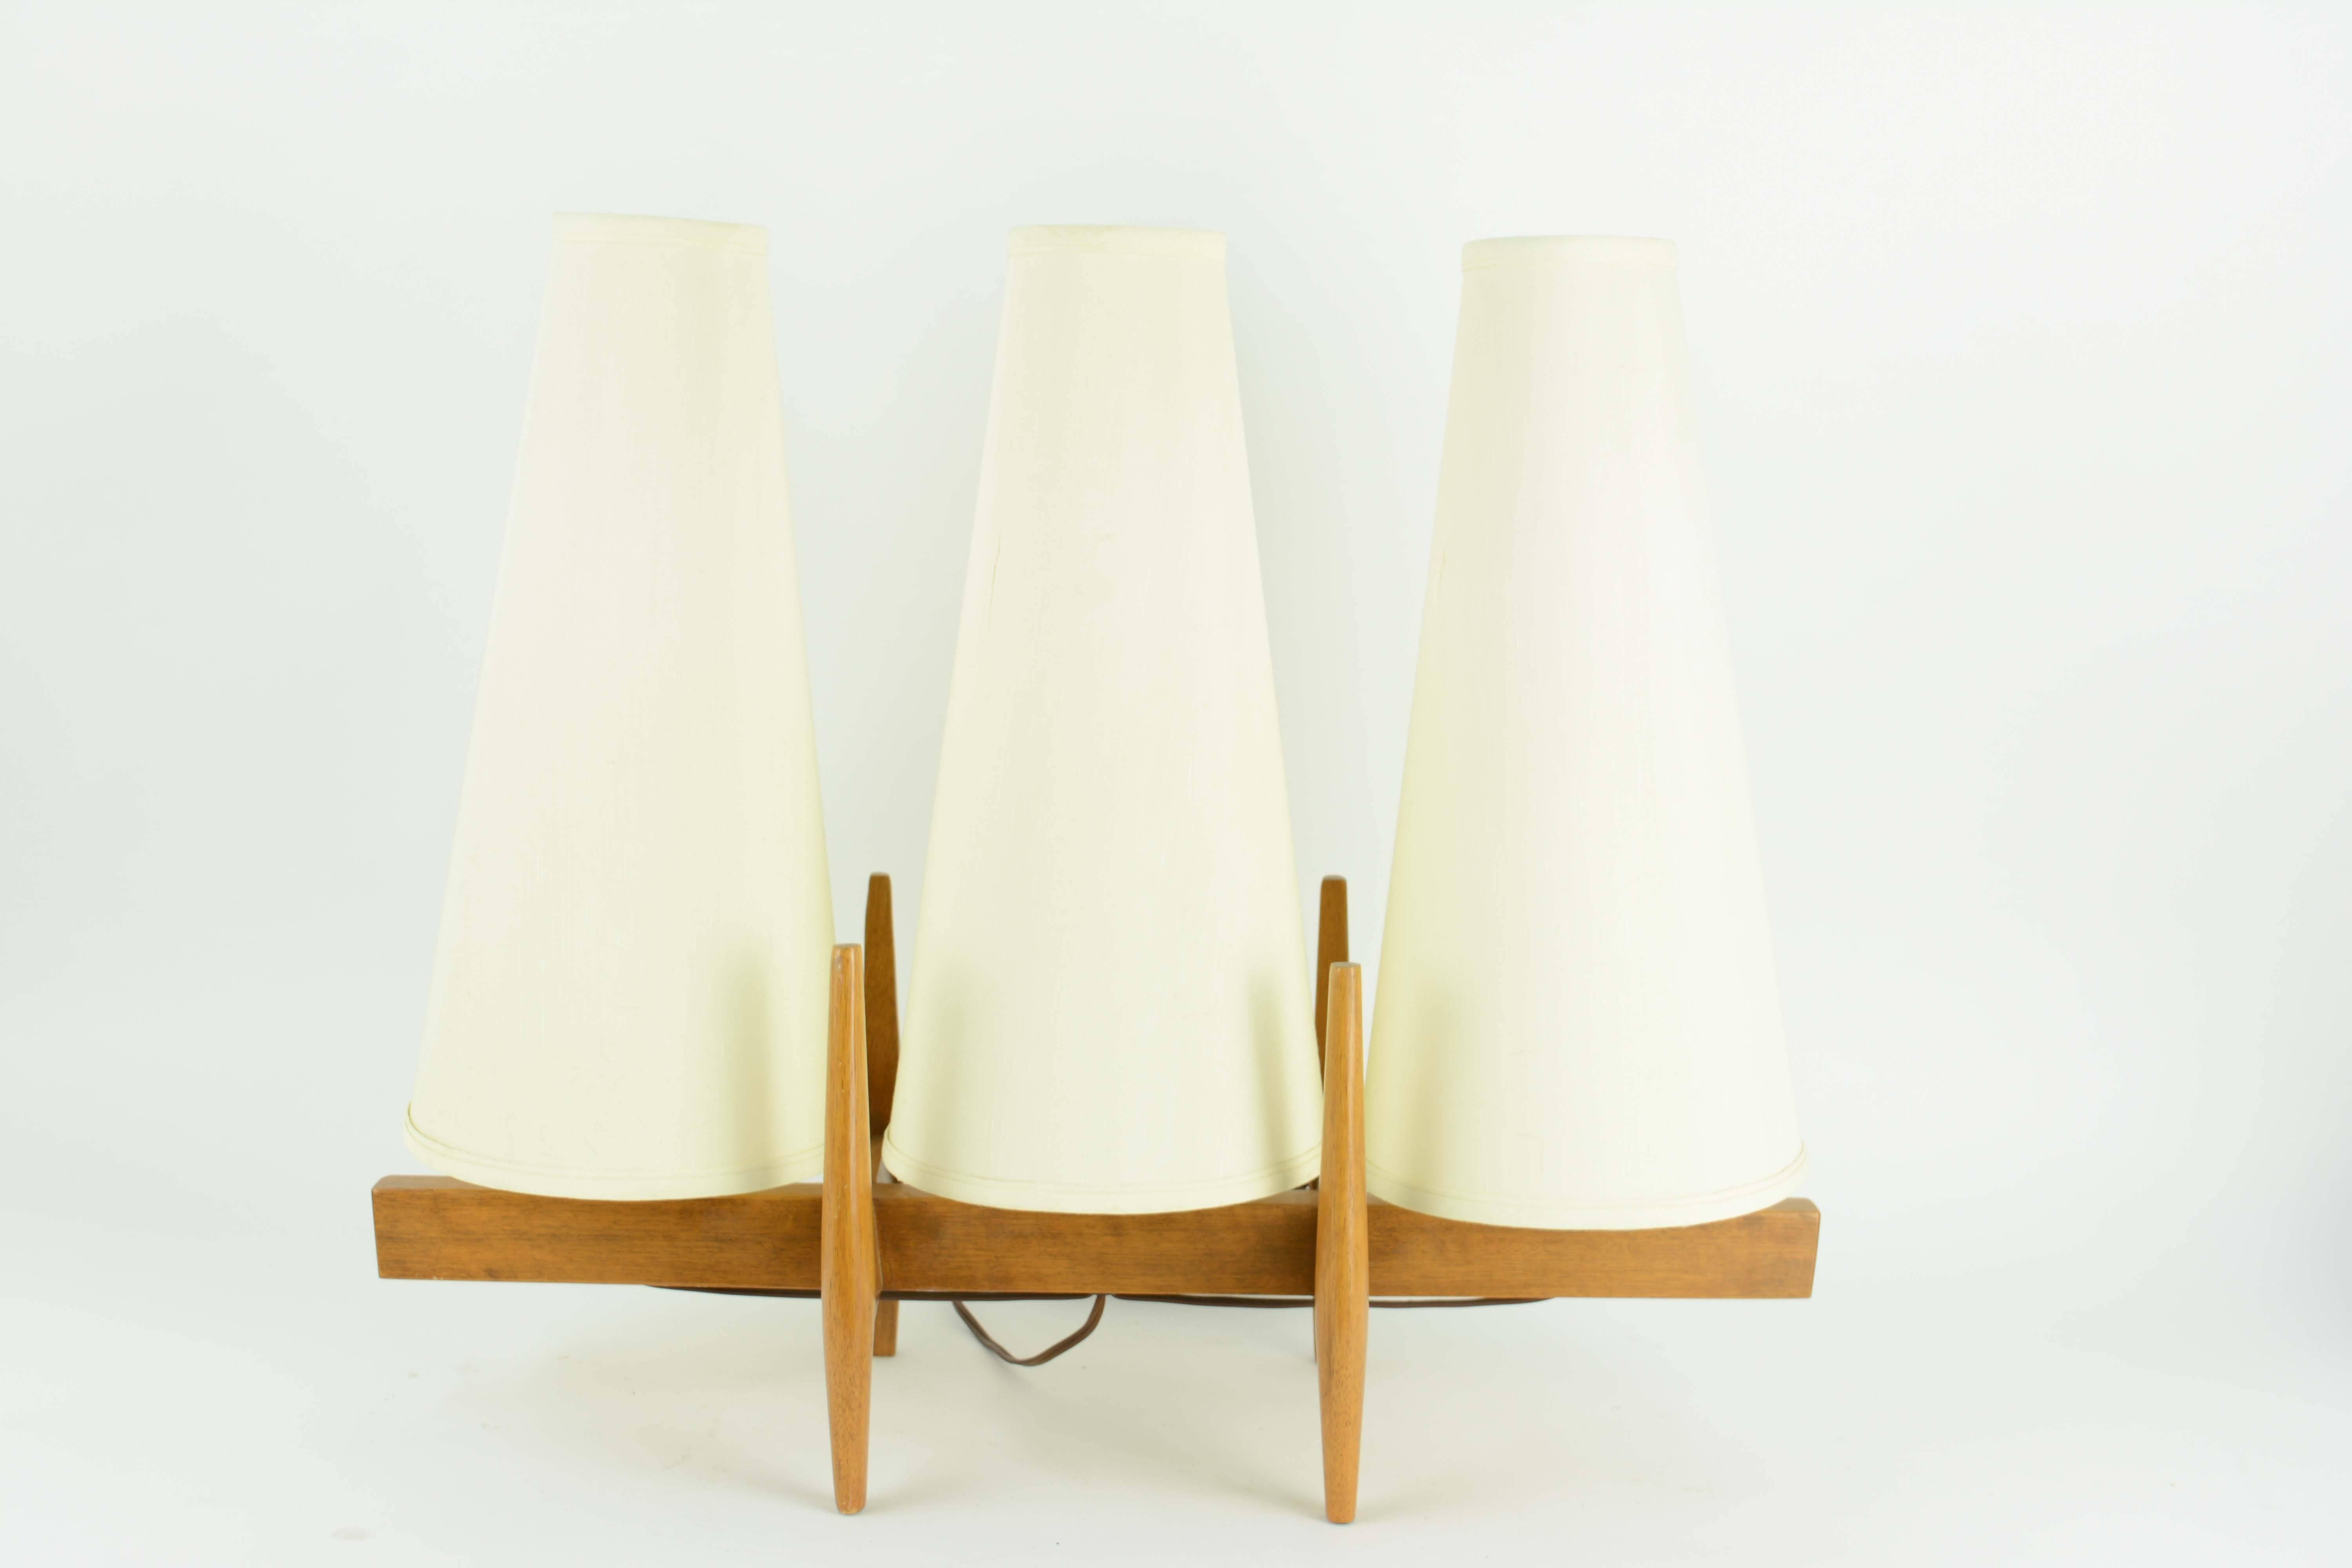 A triptych table lamp by Moss Lighting of San Francisco. The lamp is multi switching from the centre light. Right, left centre or all lights can be on.